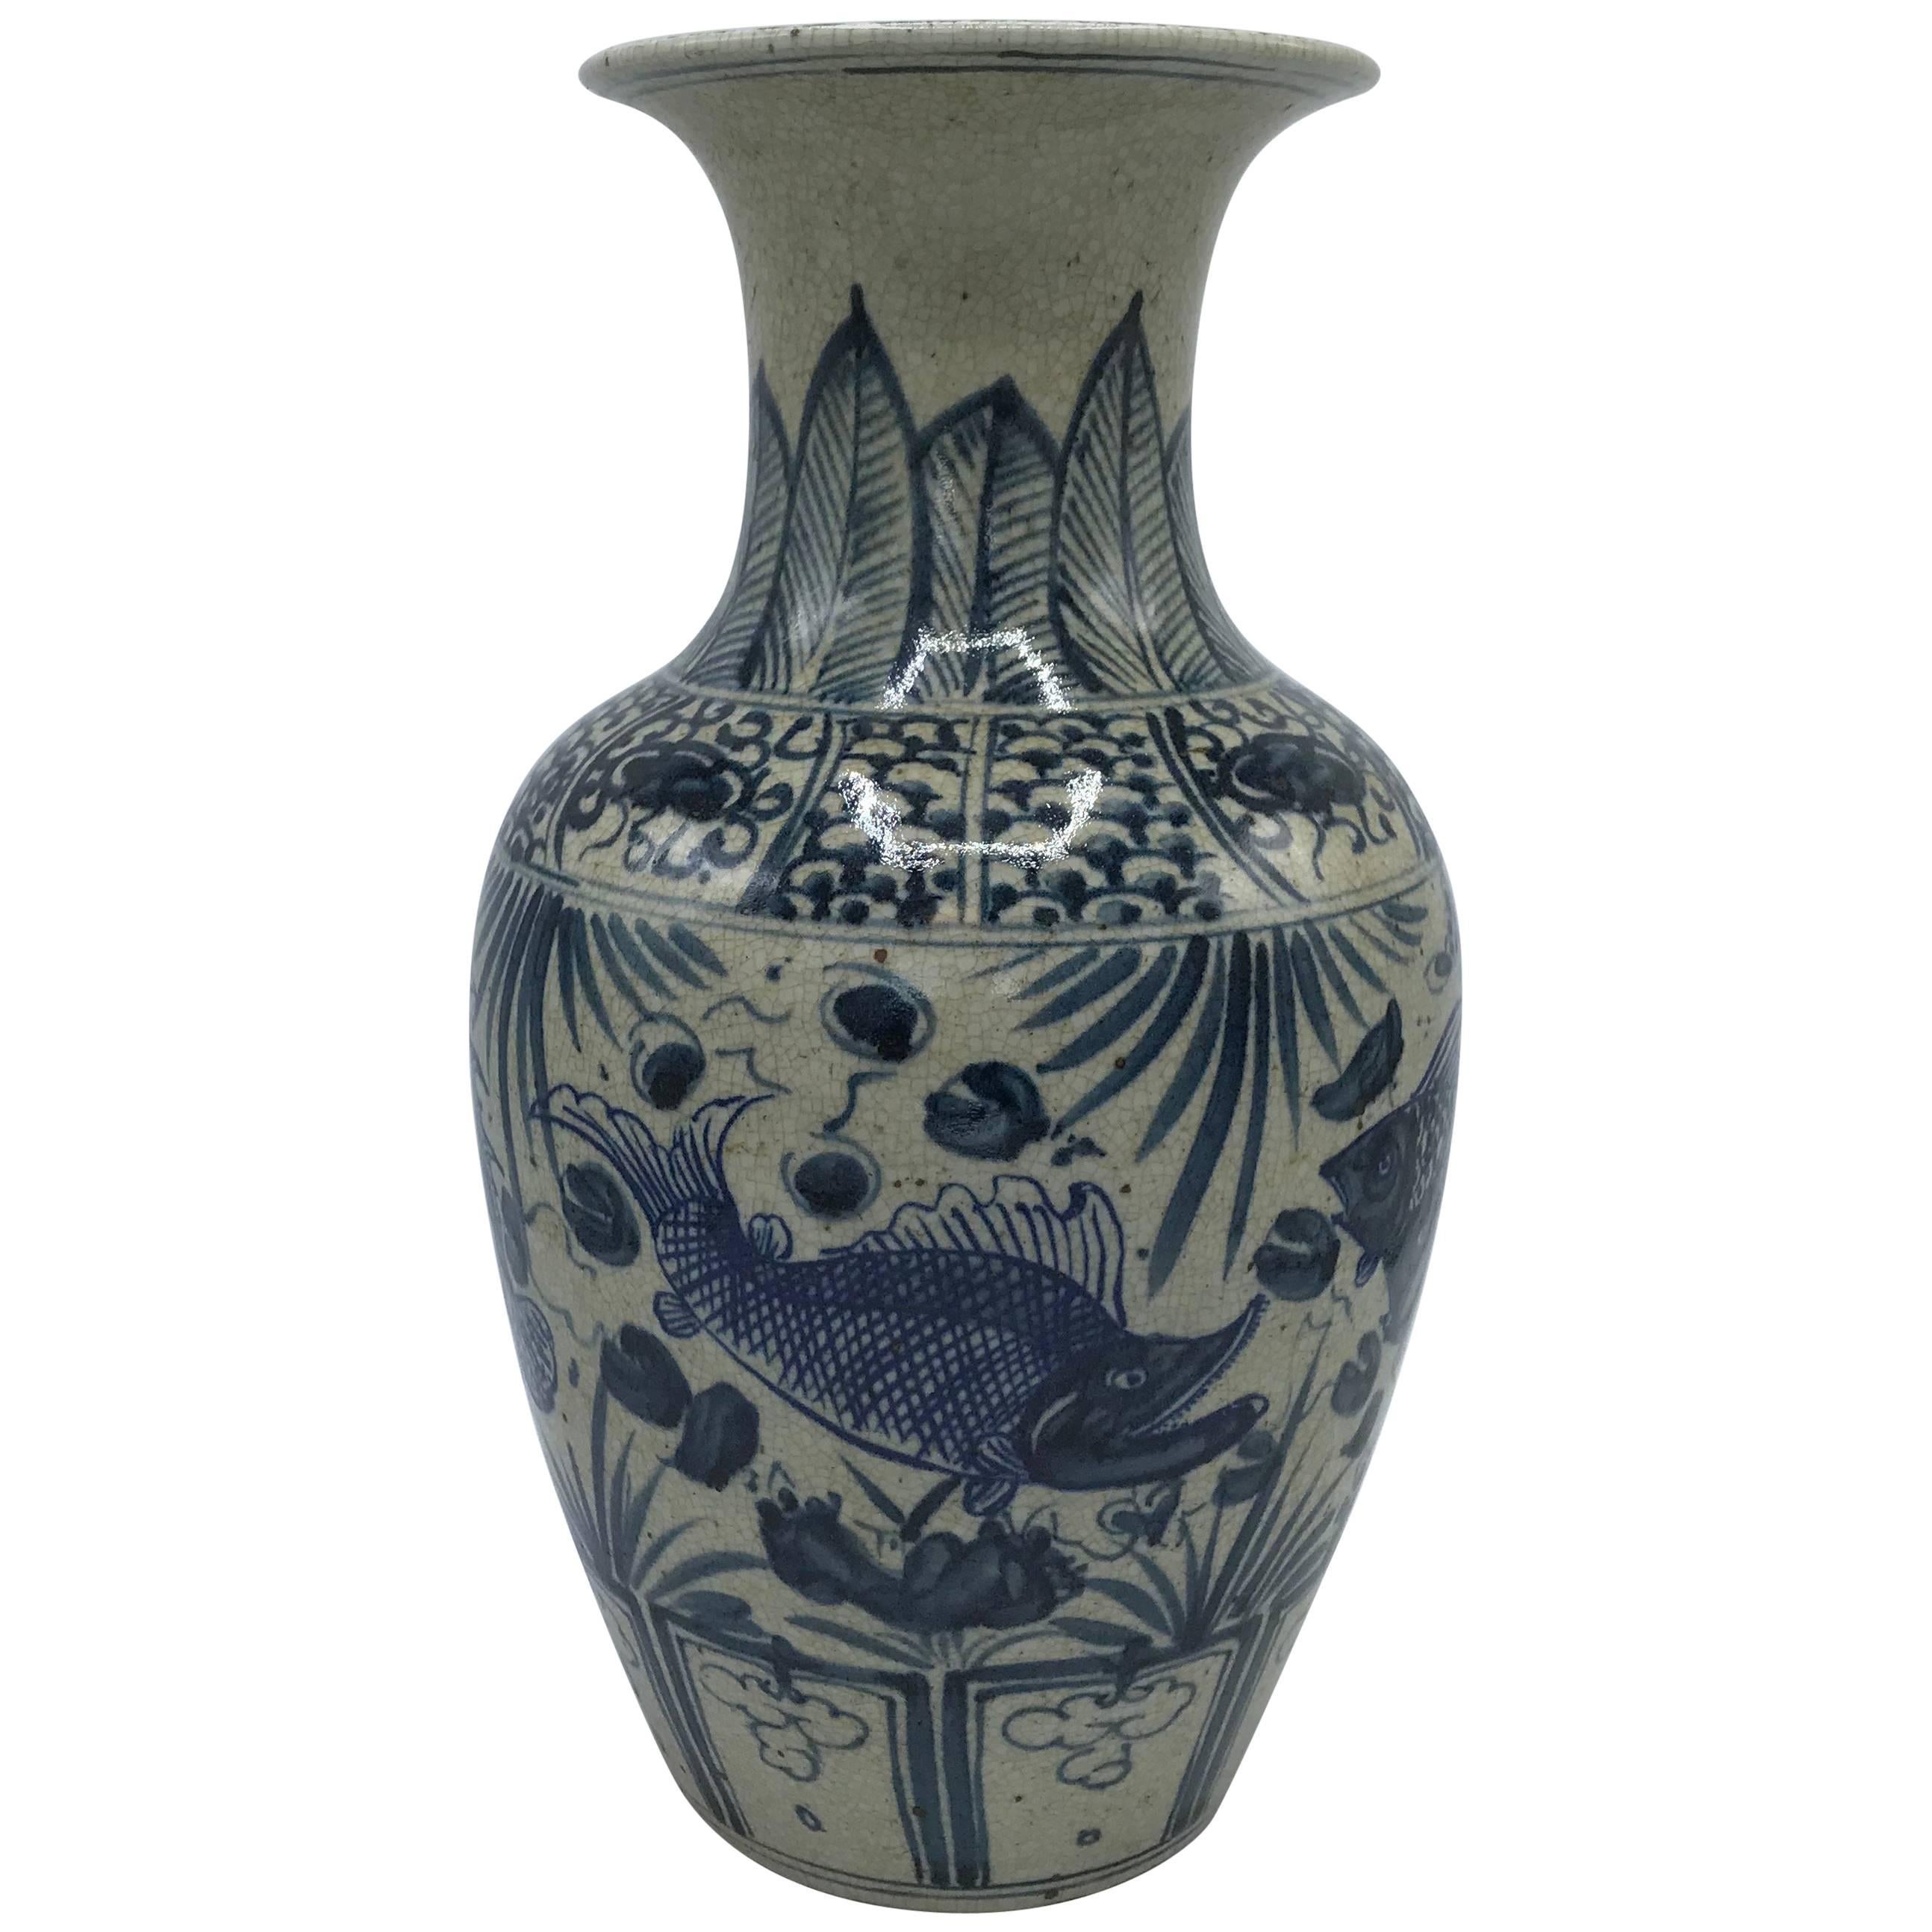 Blue and White Vase with Fish Motif and Calligraphy